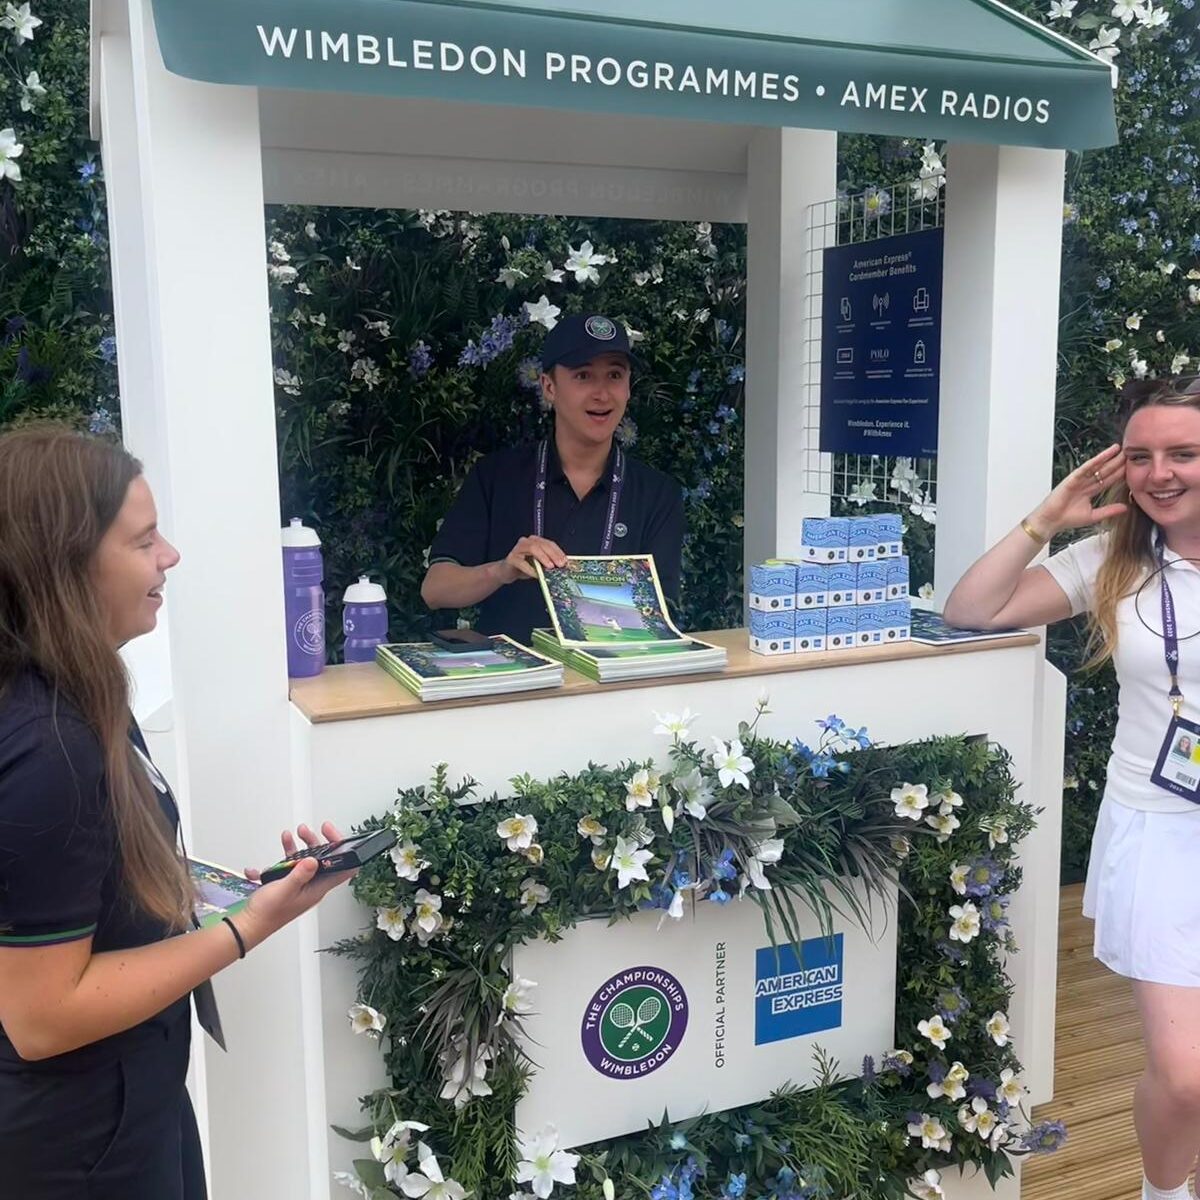 Image of the programme stand at Wimbledon that was designed and created by PPL Group.